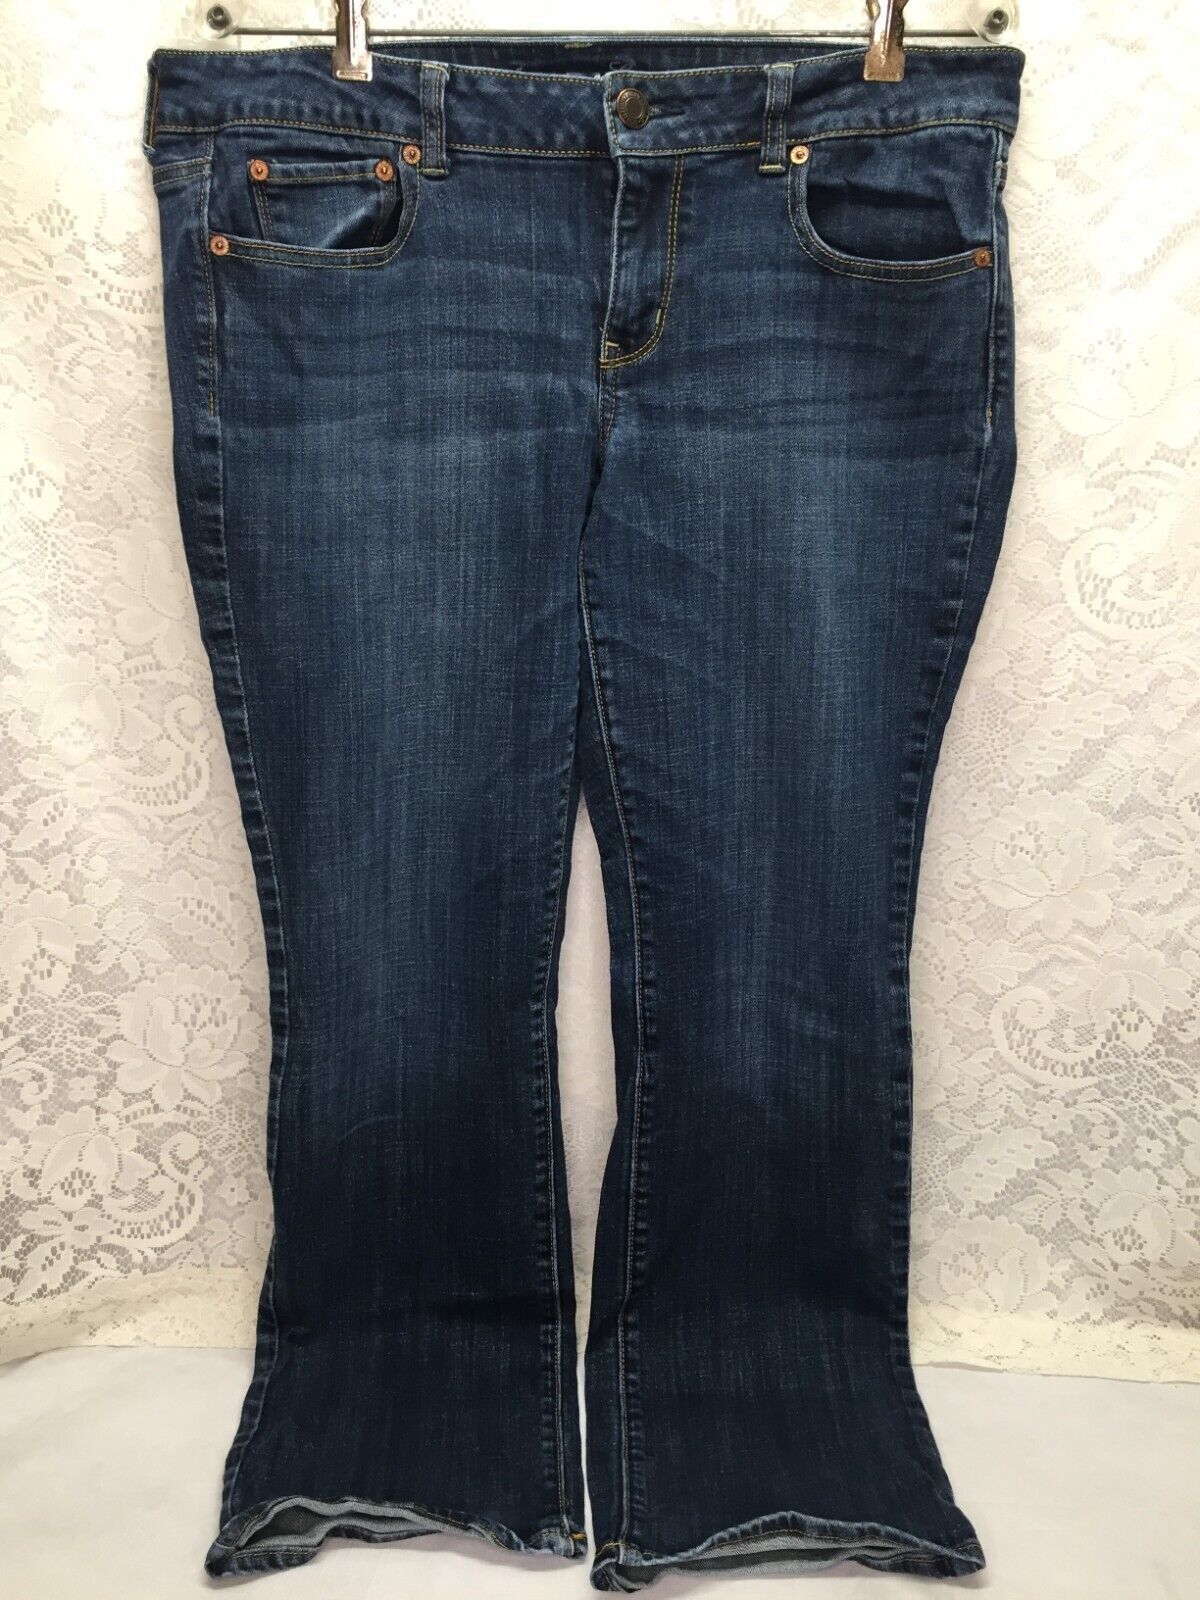 Primary image for American Eagle Stretch Blue Jeans Size 14 Regular/Standard Women's Pants